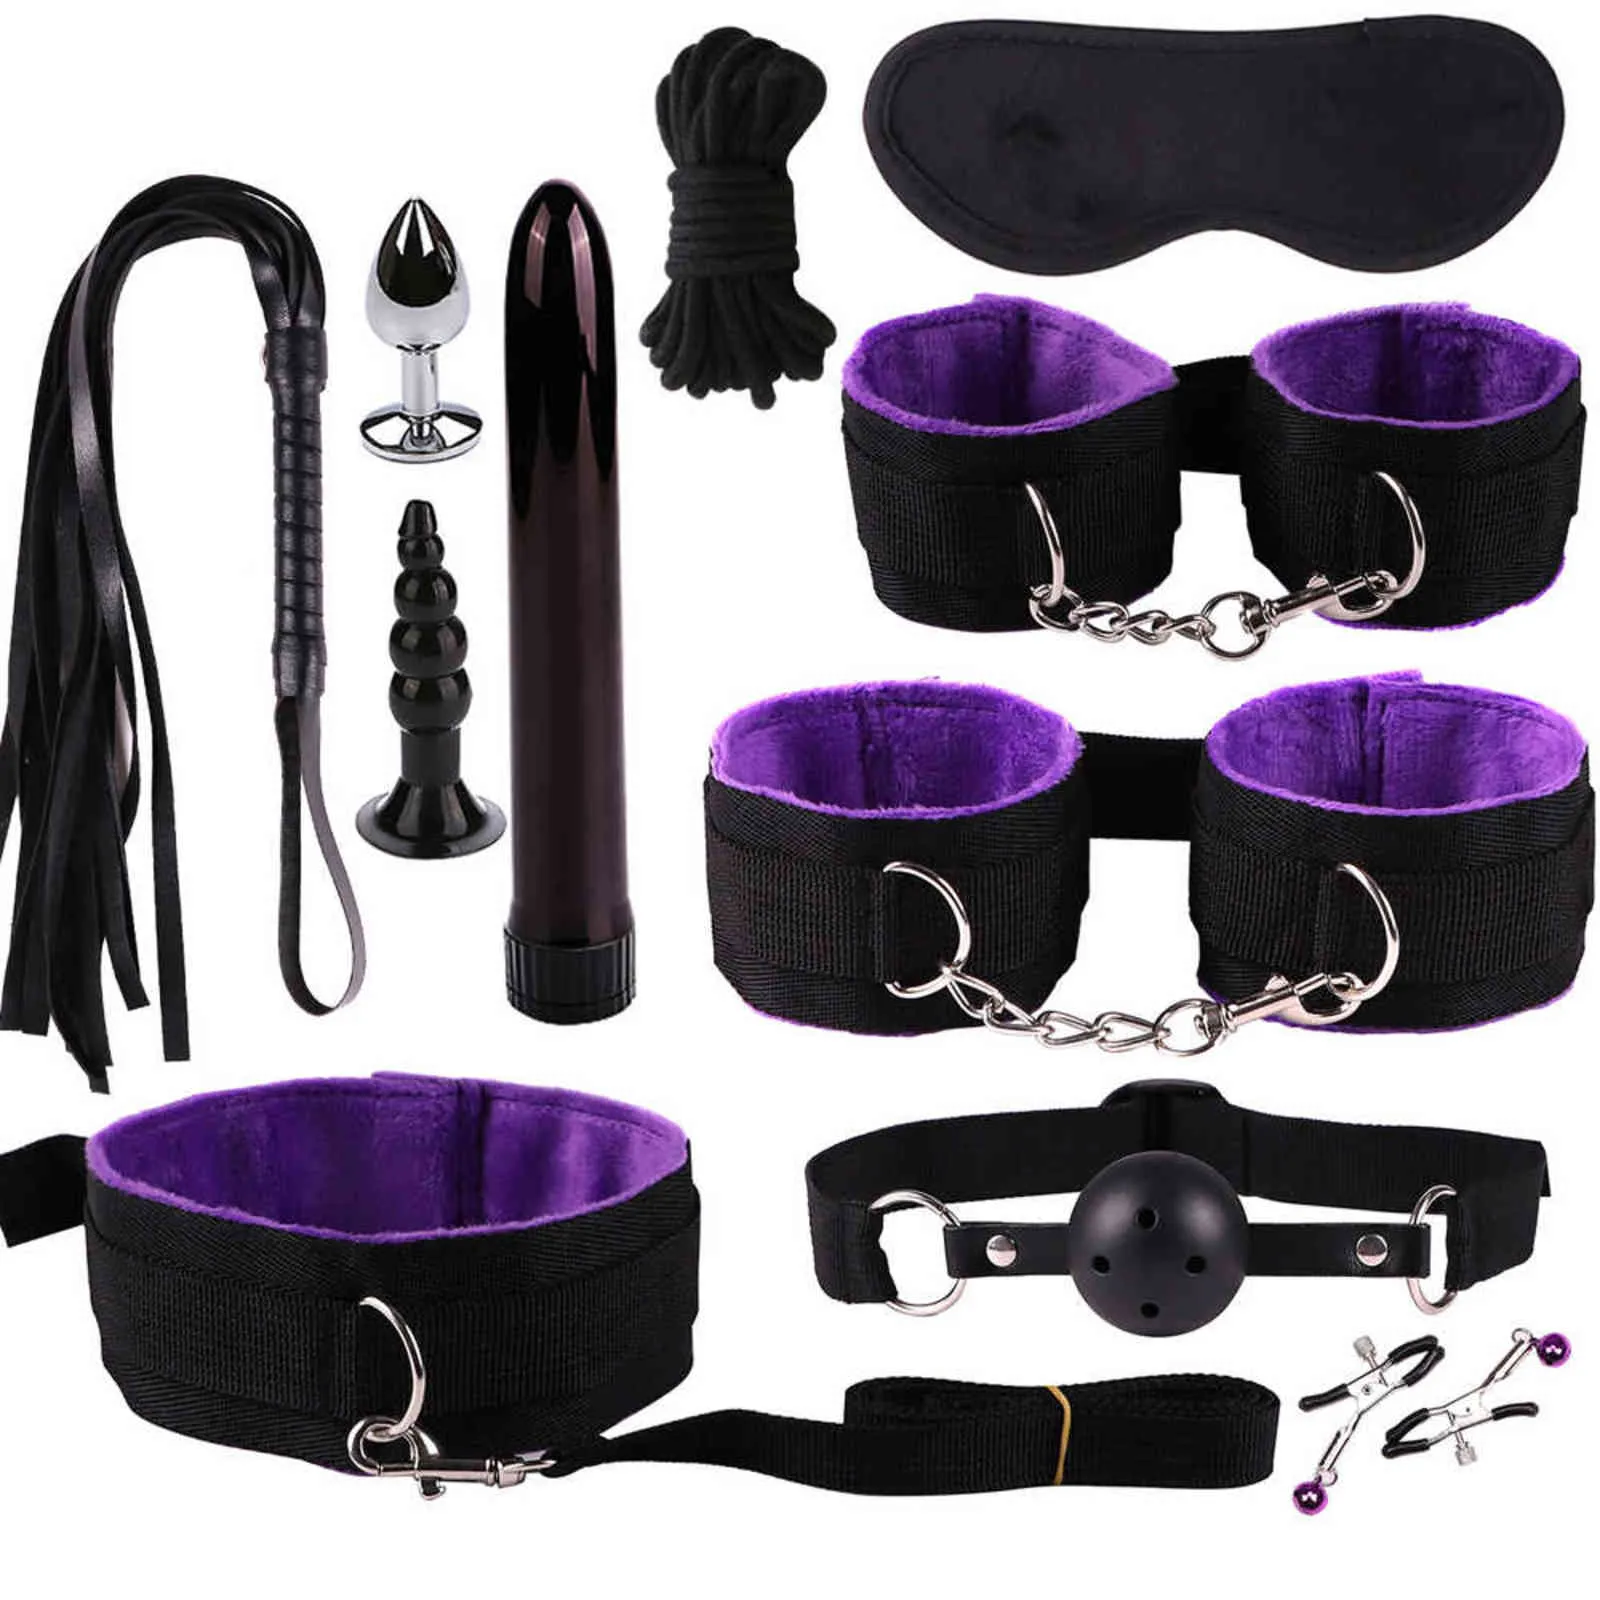 NXY Sm bondage BDSM Sex Toys For Couples Handcuffs Whip Nipples Clip Blindfold Mouth Gag Adult Kit Bondage Toy Flirt Games 1126